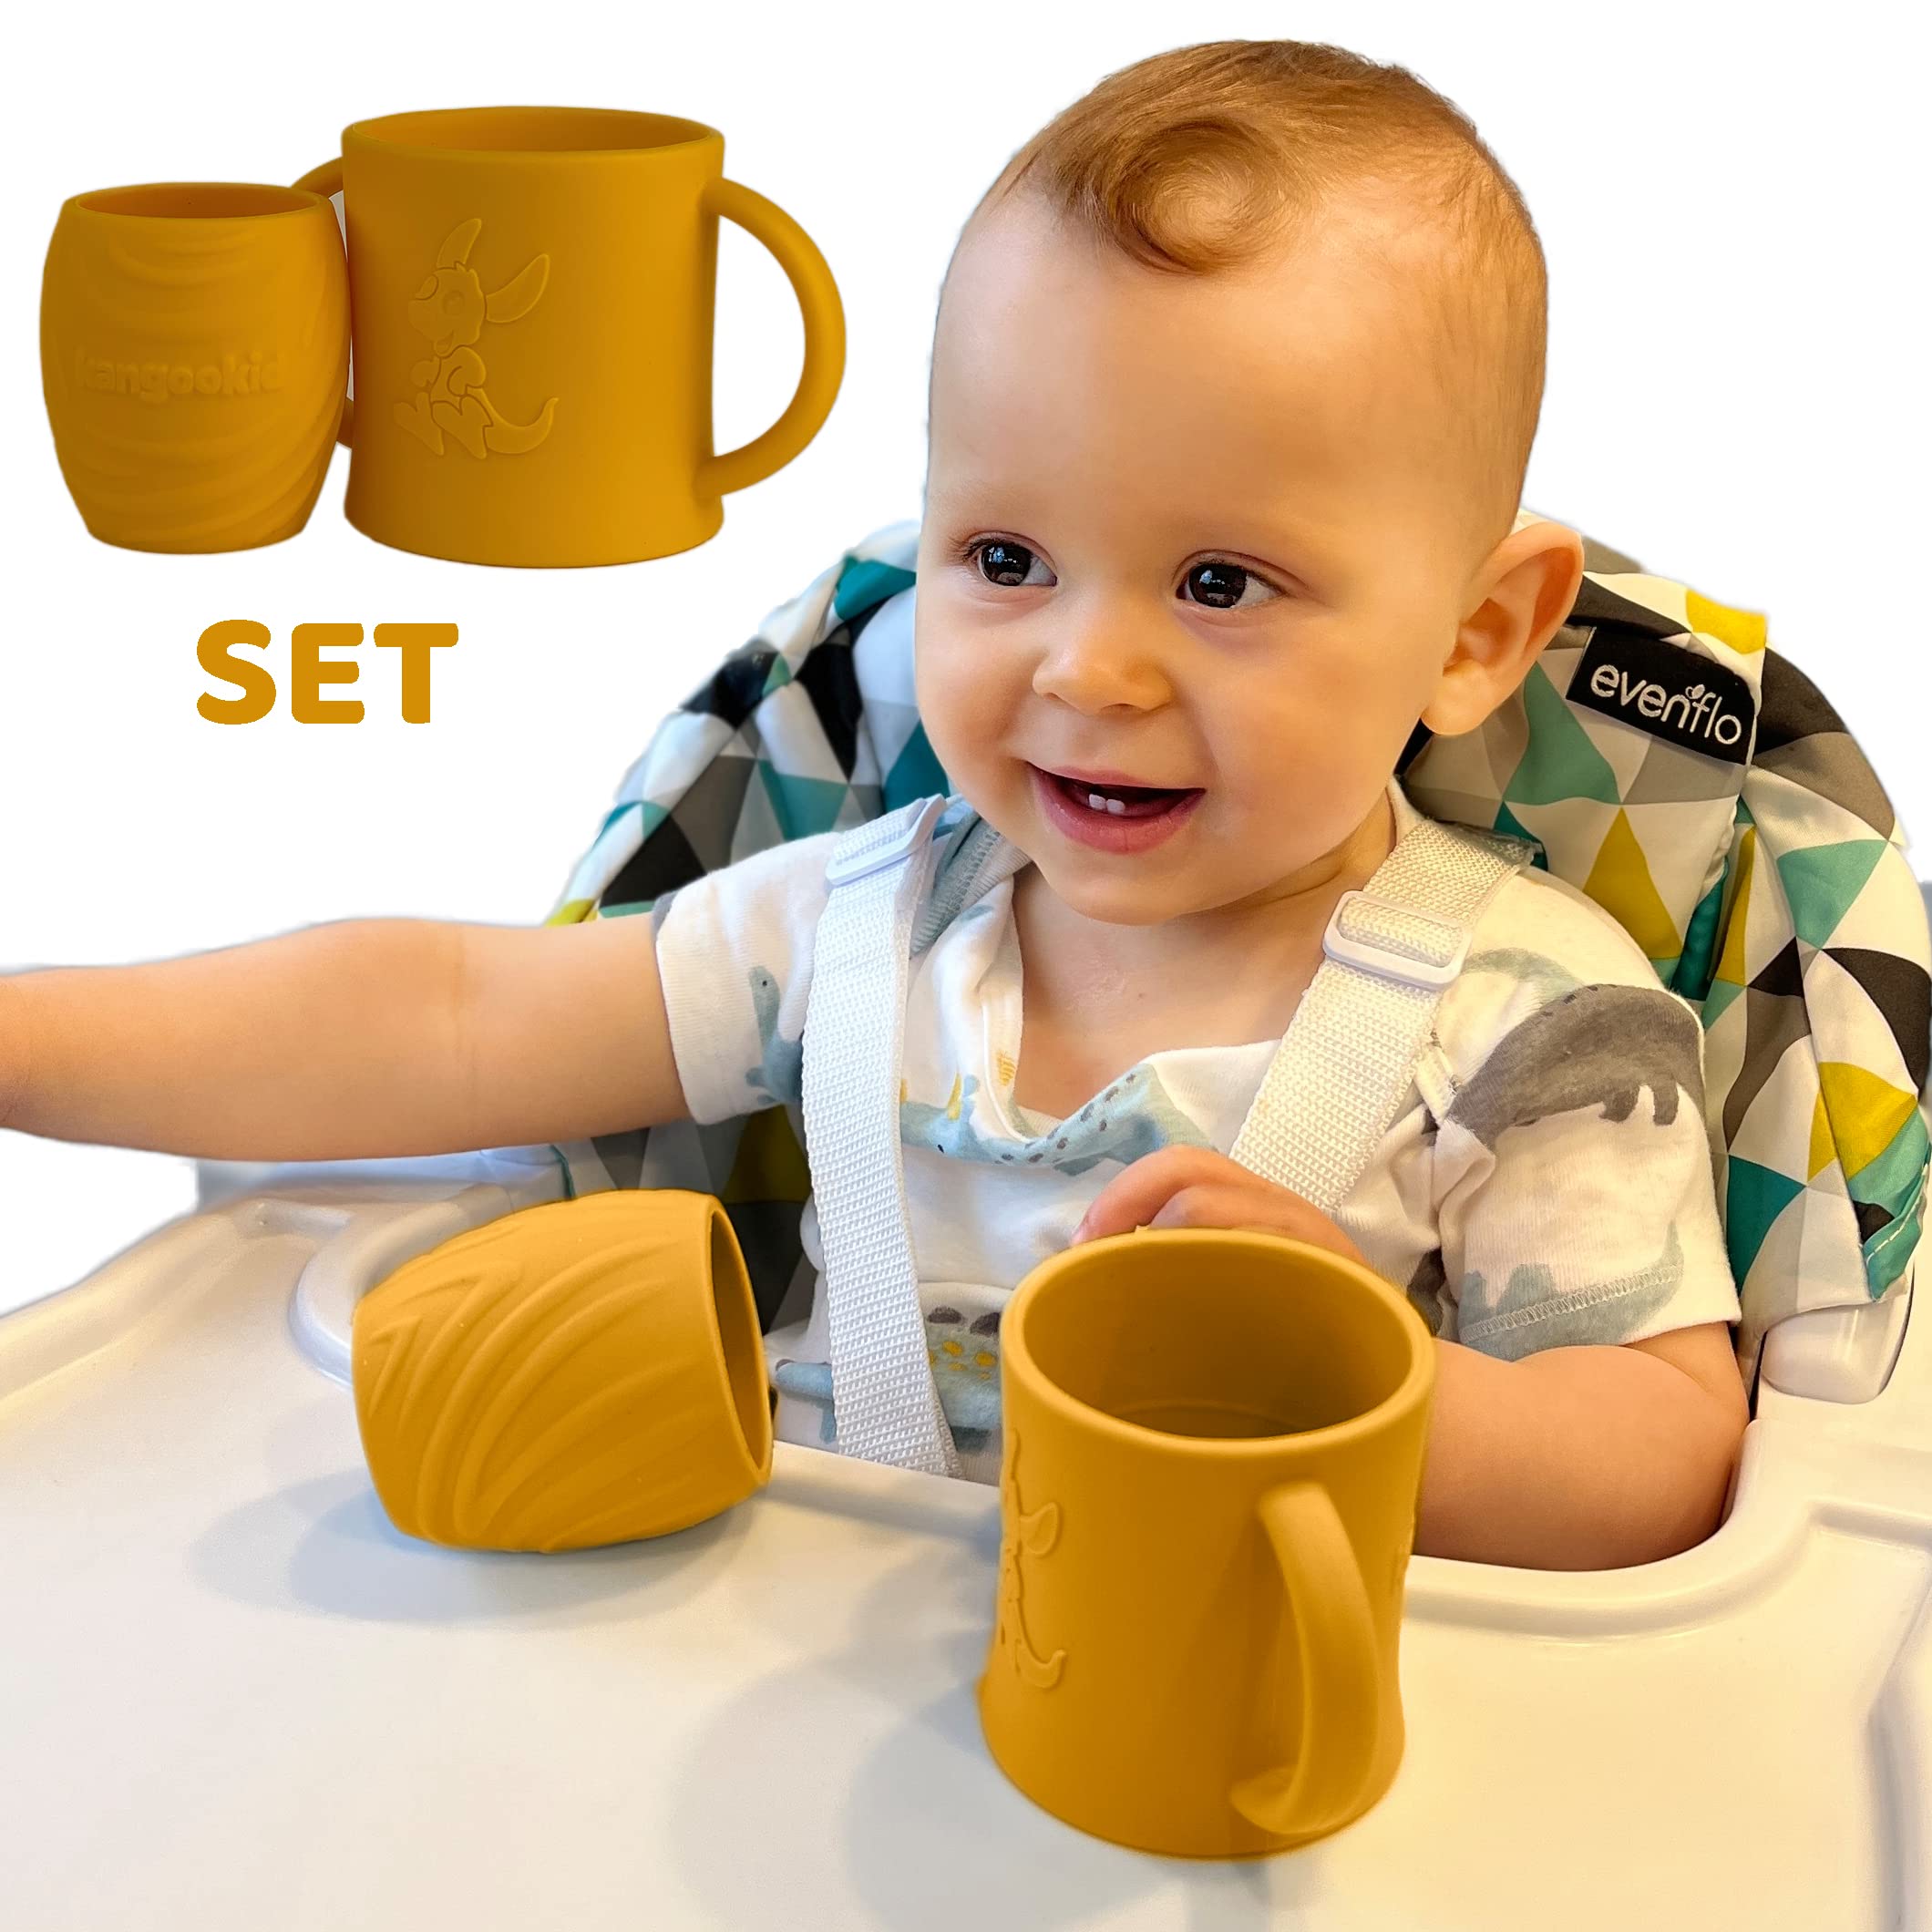 Silicone Baby Cup - Toddler Training Cup - Open Cup for Baby Led